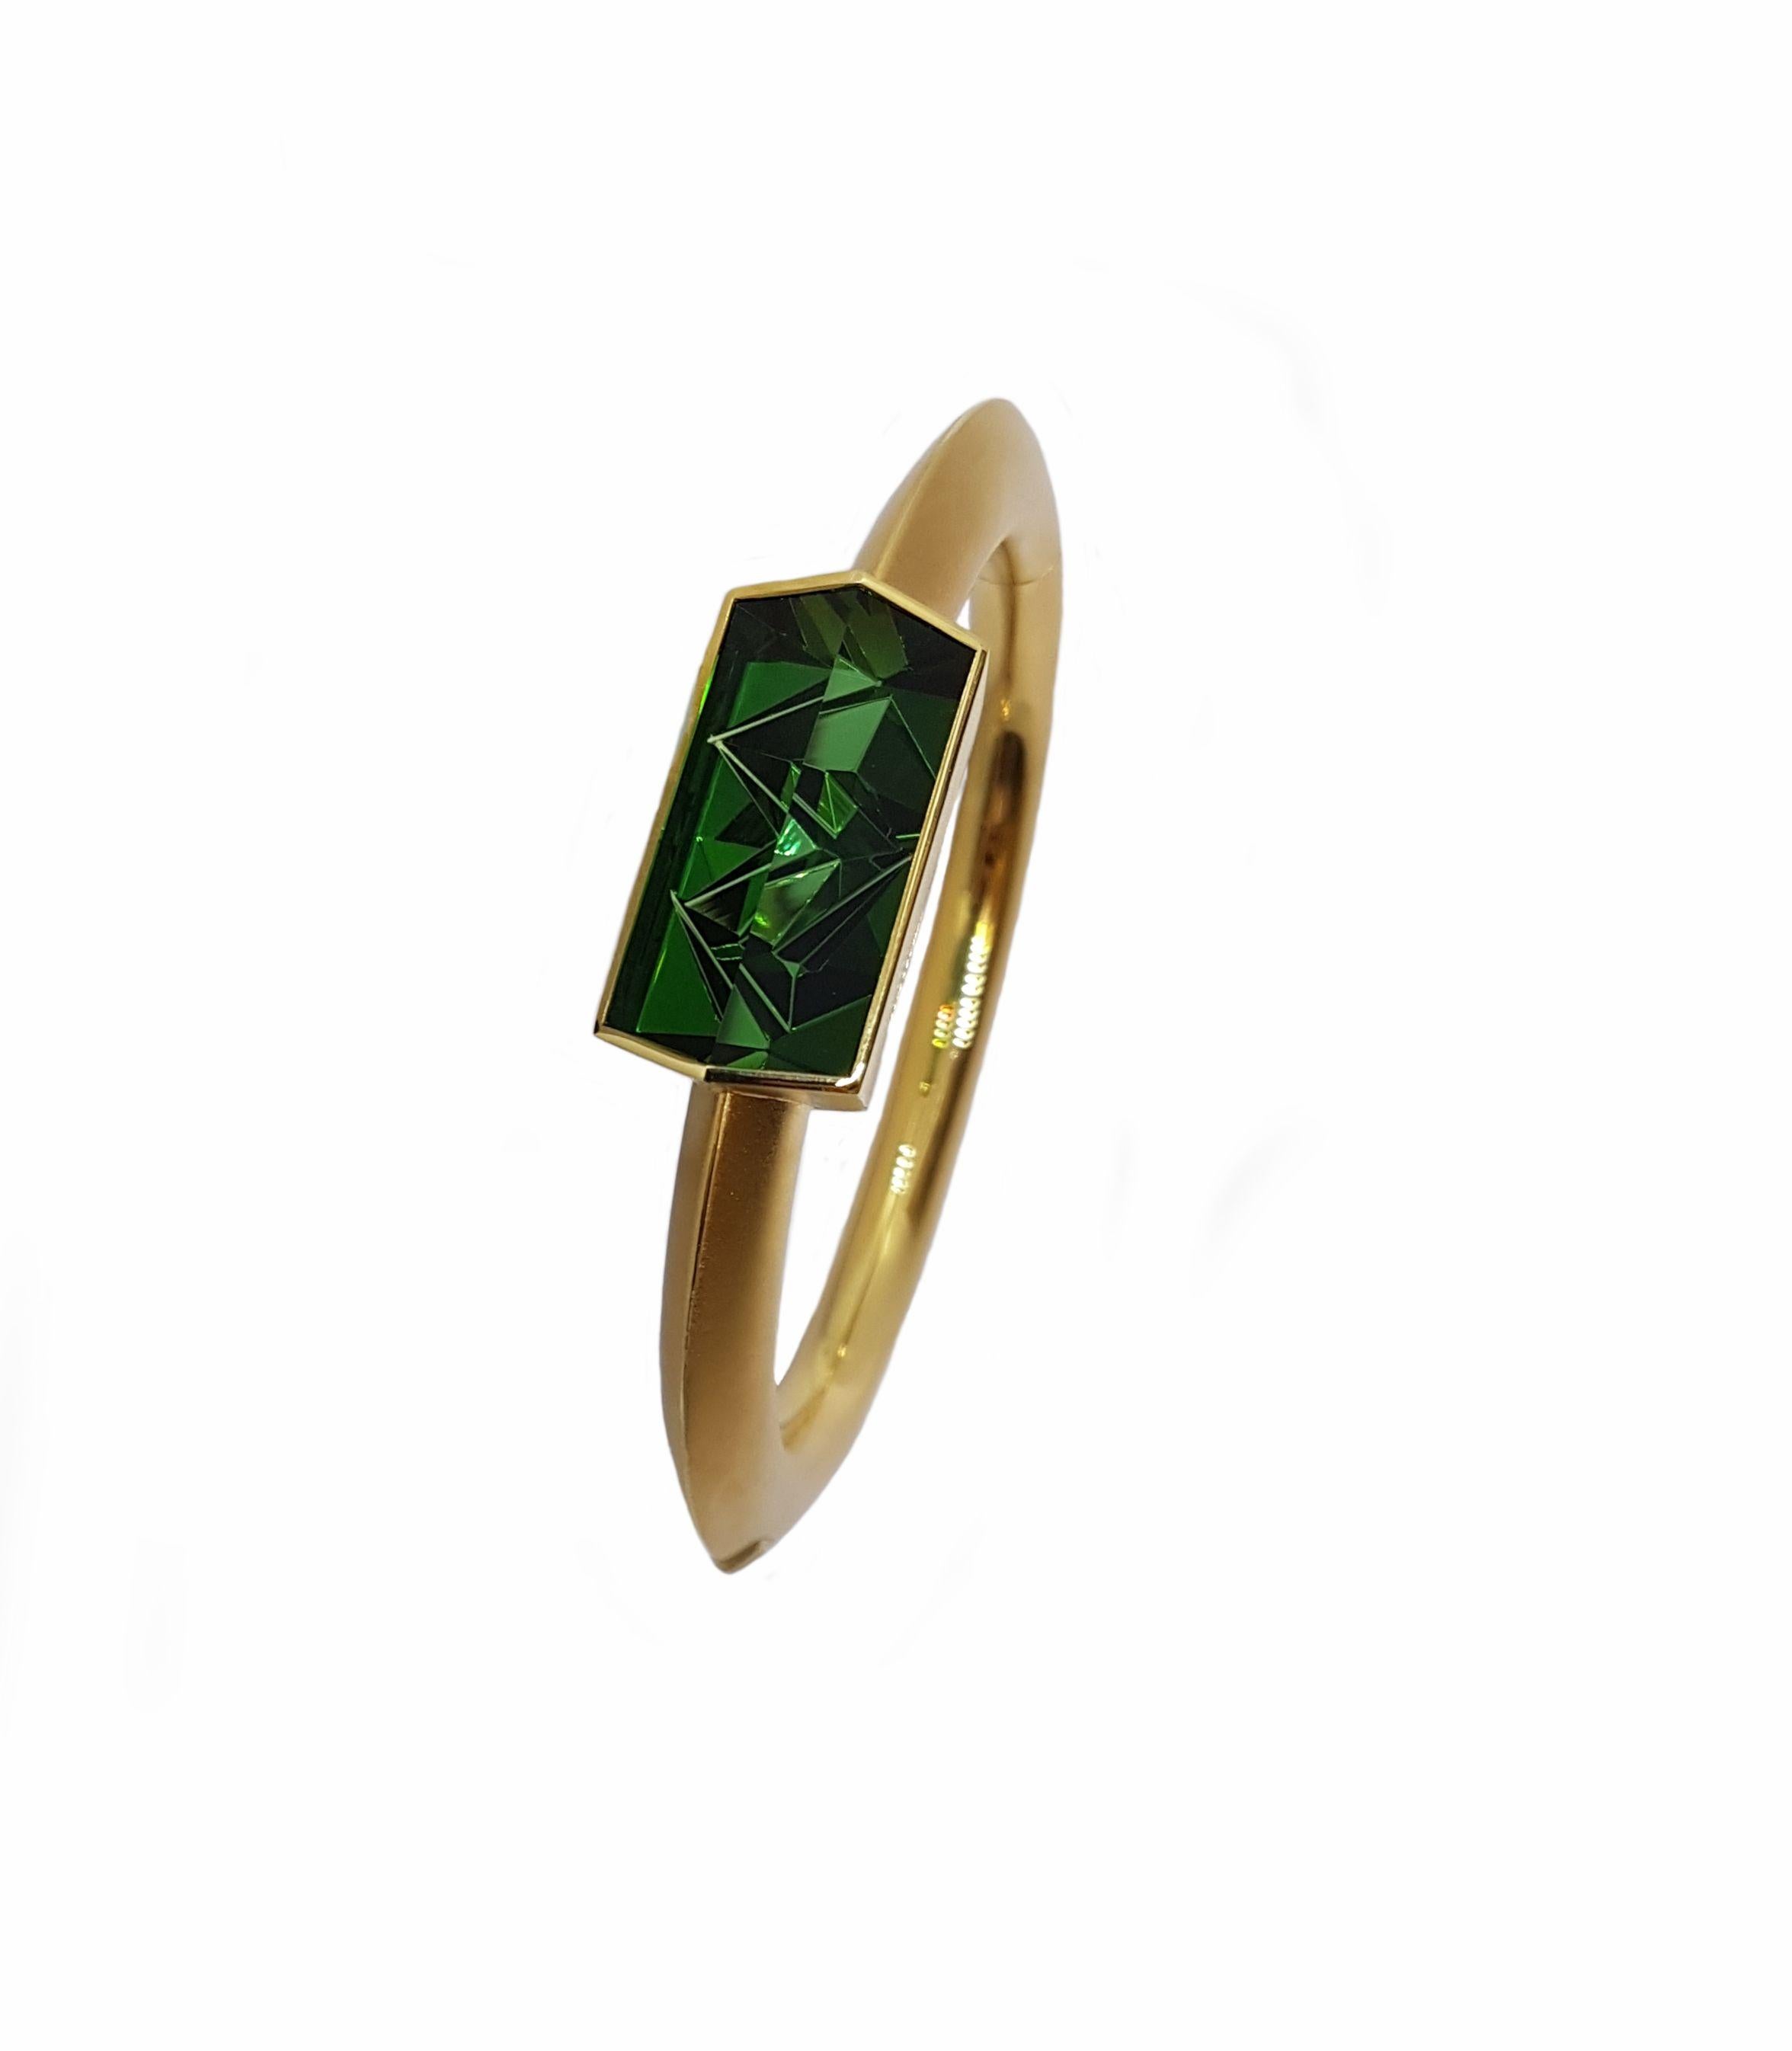 Gorgeous bangle bracelet by Atelier Munsteiner made of an exquisite luxuriant tourmaline 
of 26.69 carats, superbly and extraordinarily cut ,and yellow gold. Artsy unique piece for connaiseures.
This beautiful piece of fine jewelry will surely